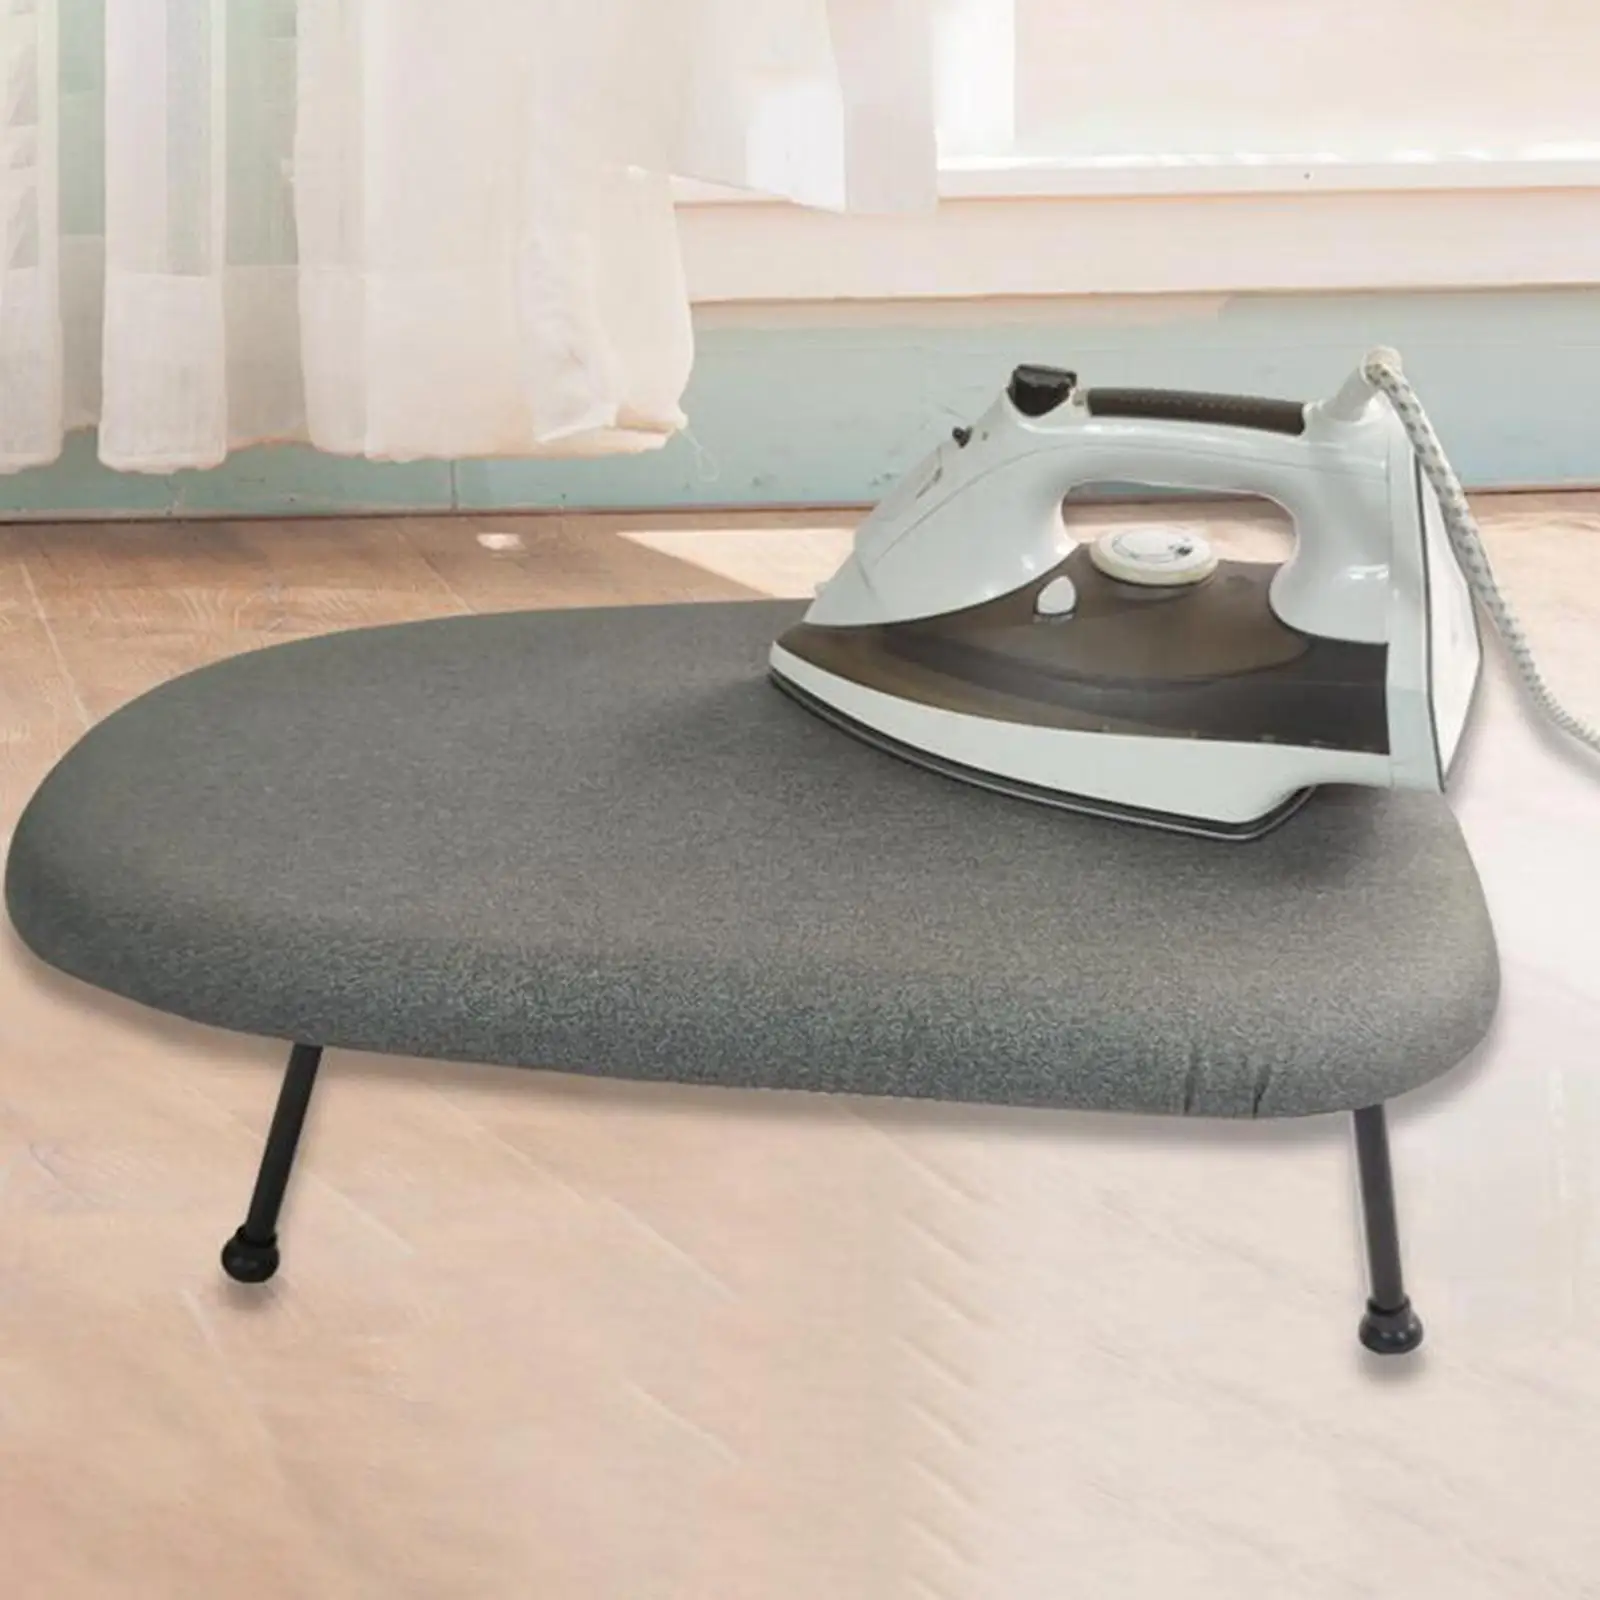 Tabletop Ironing Board Ironing Cover Laptop Table for Home Ironing Clothes